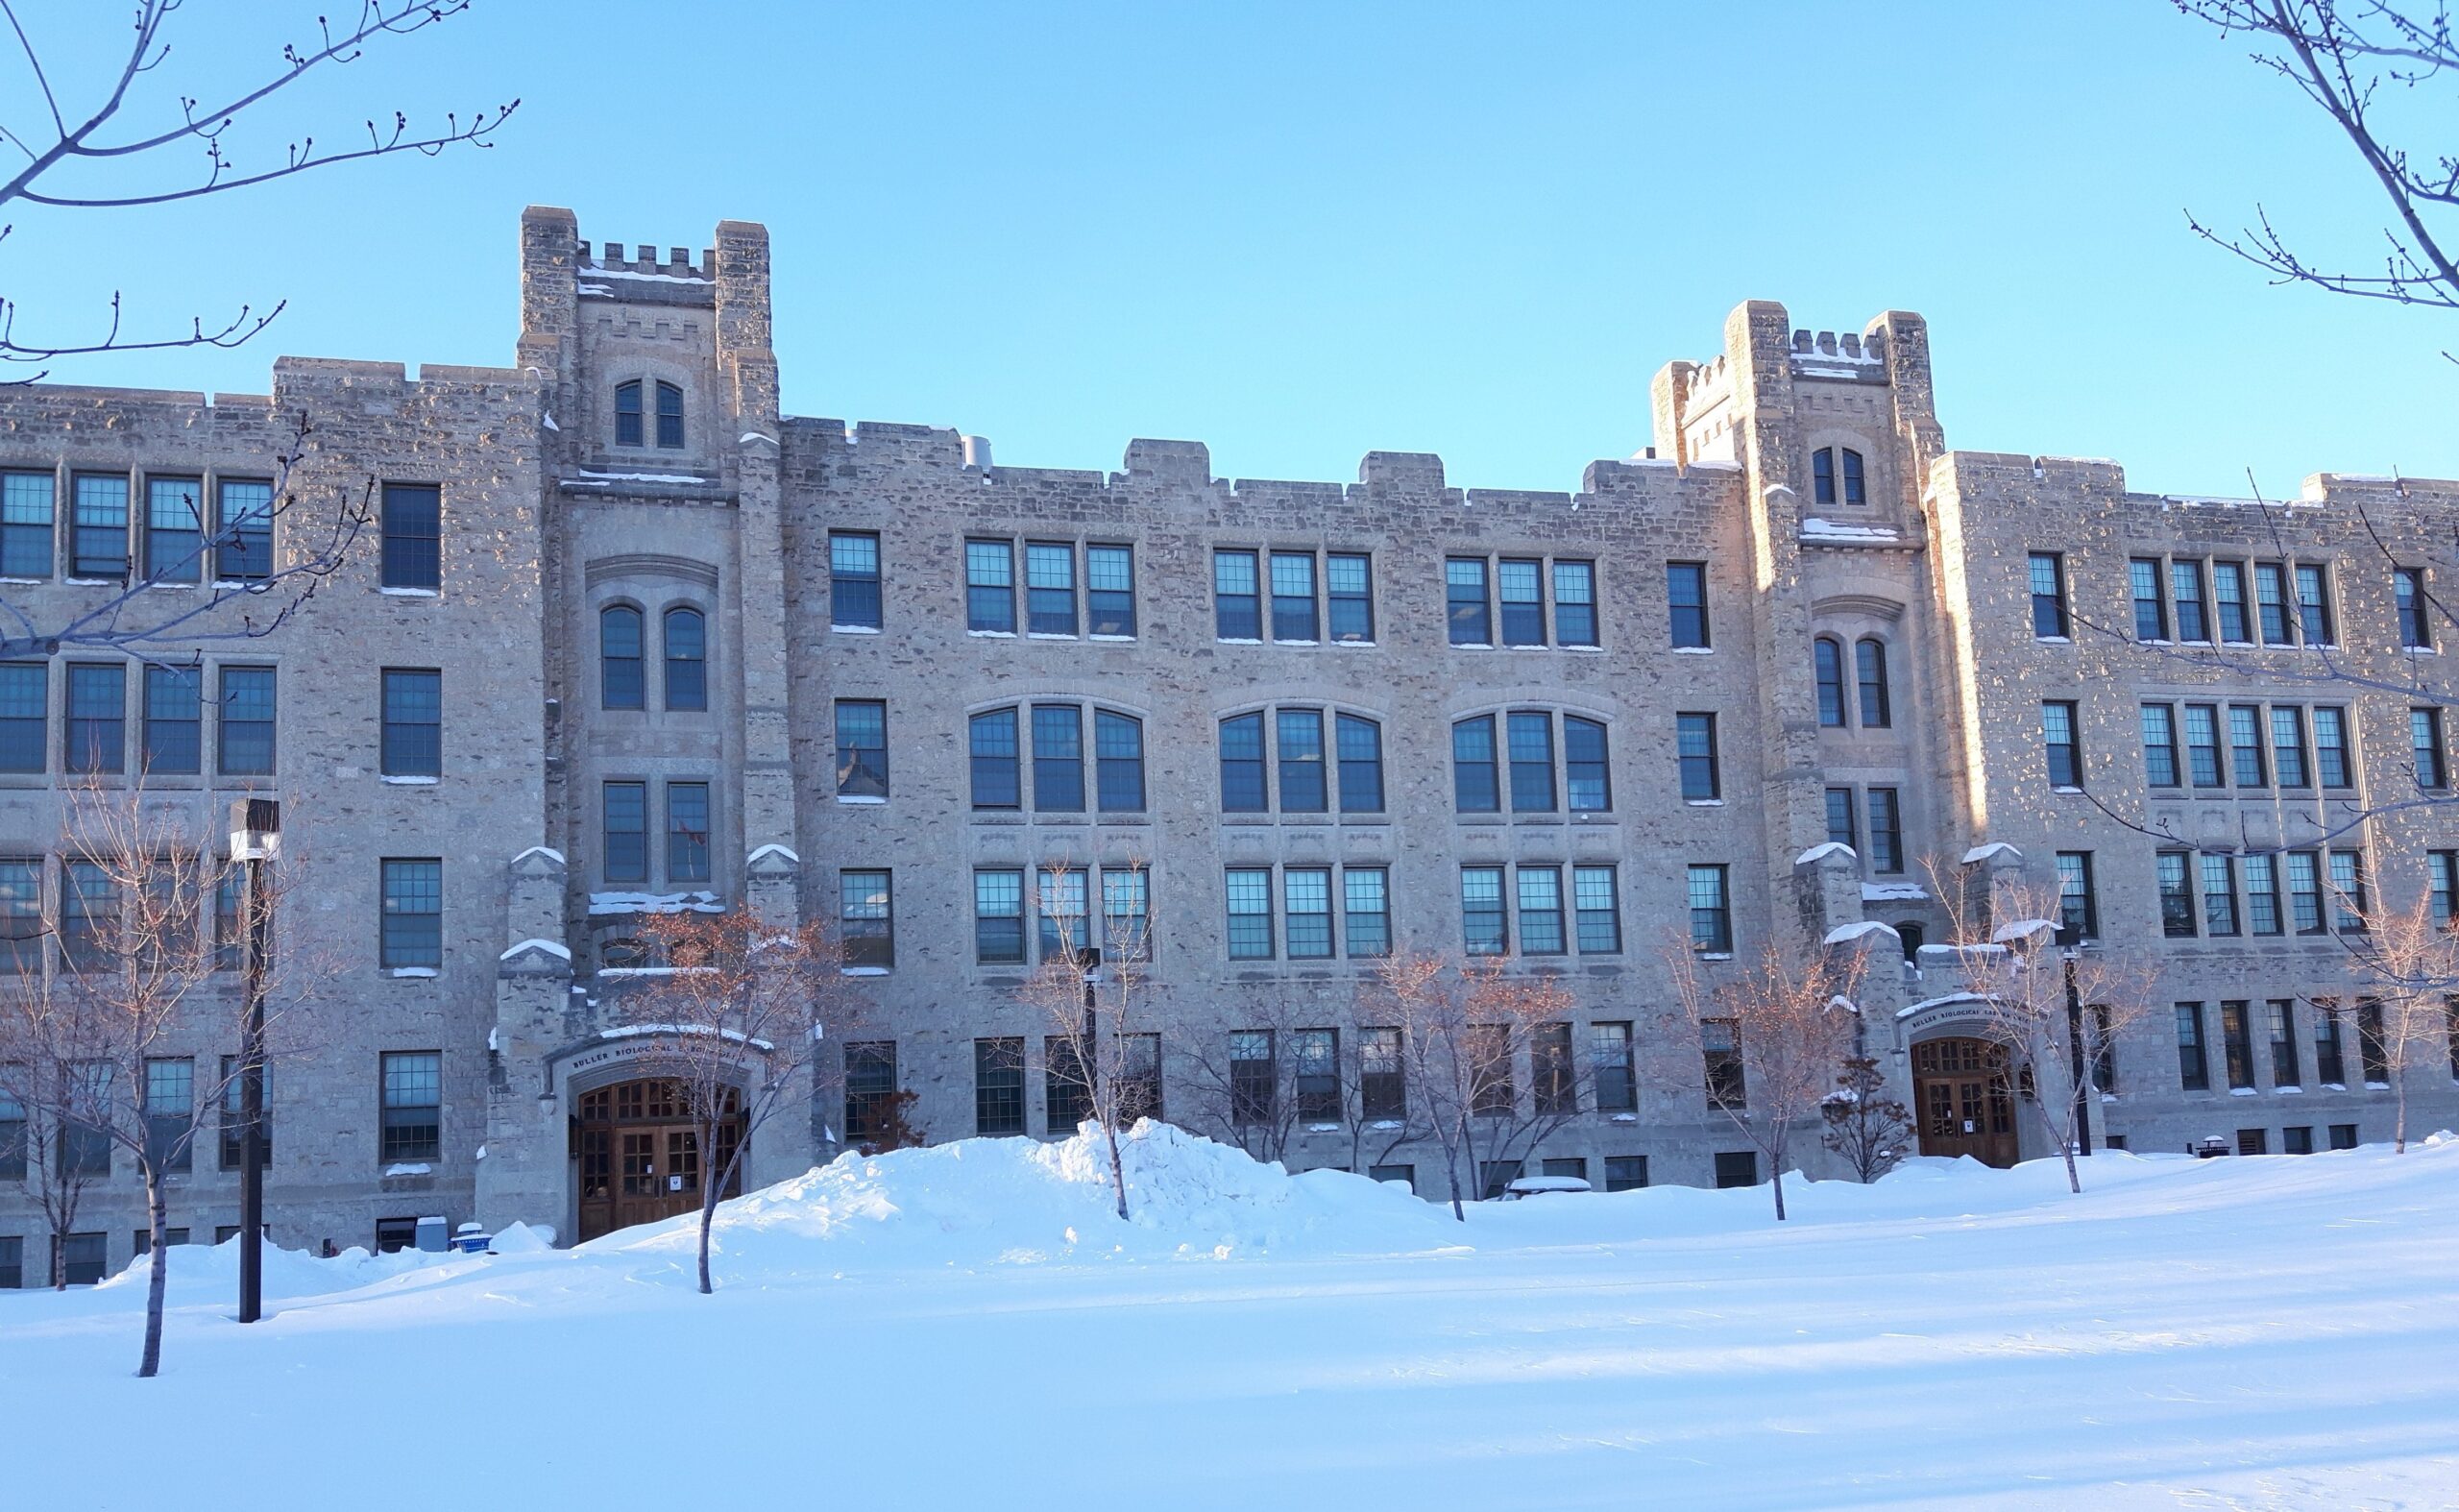 A large four-storey building built of light-coloured stone, with snow covering the grounds in front of it.